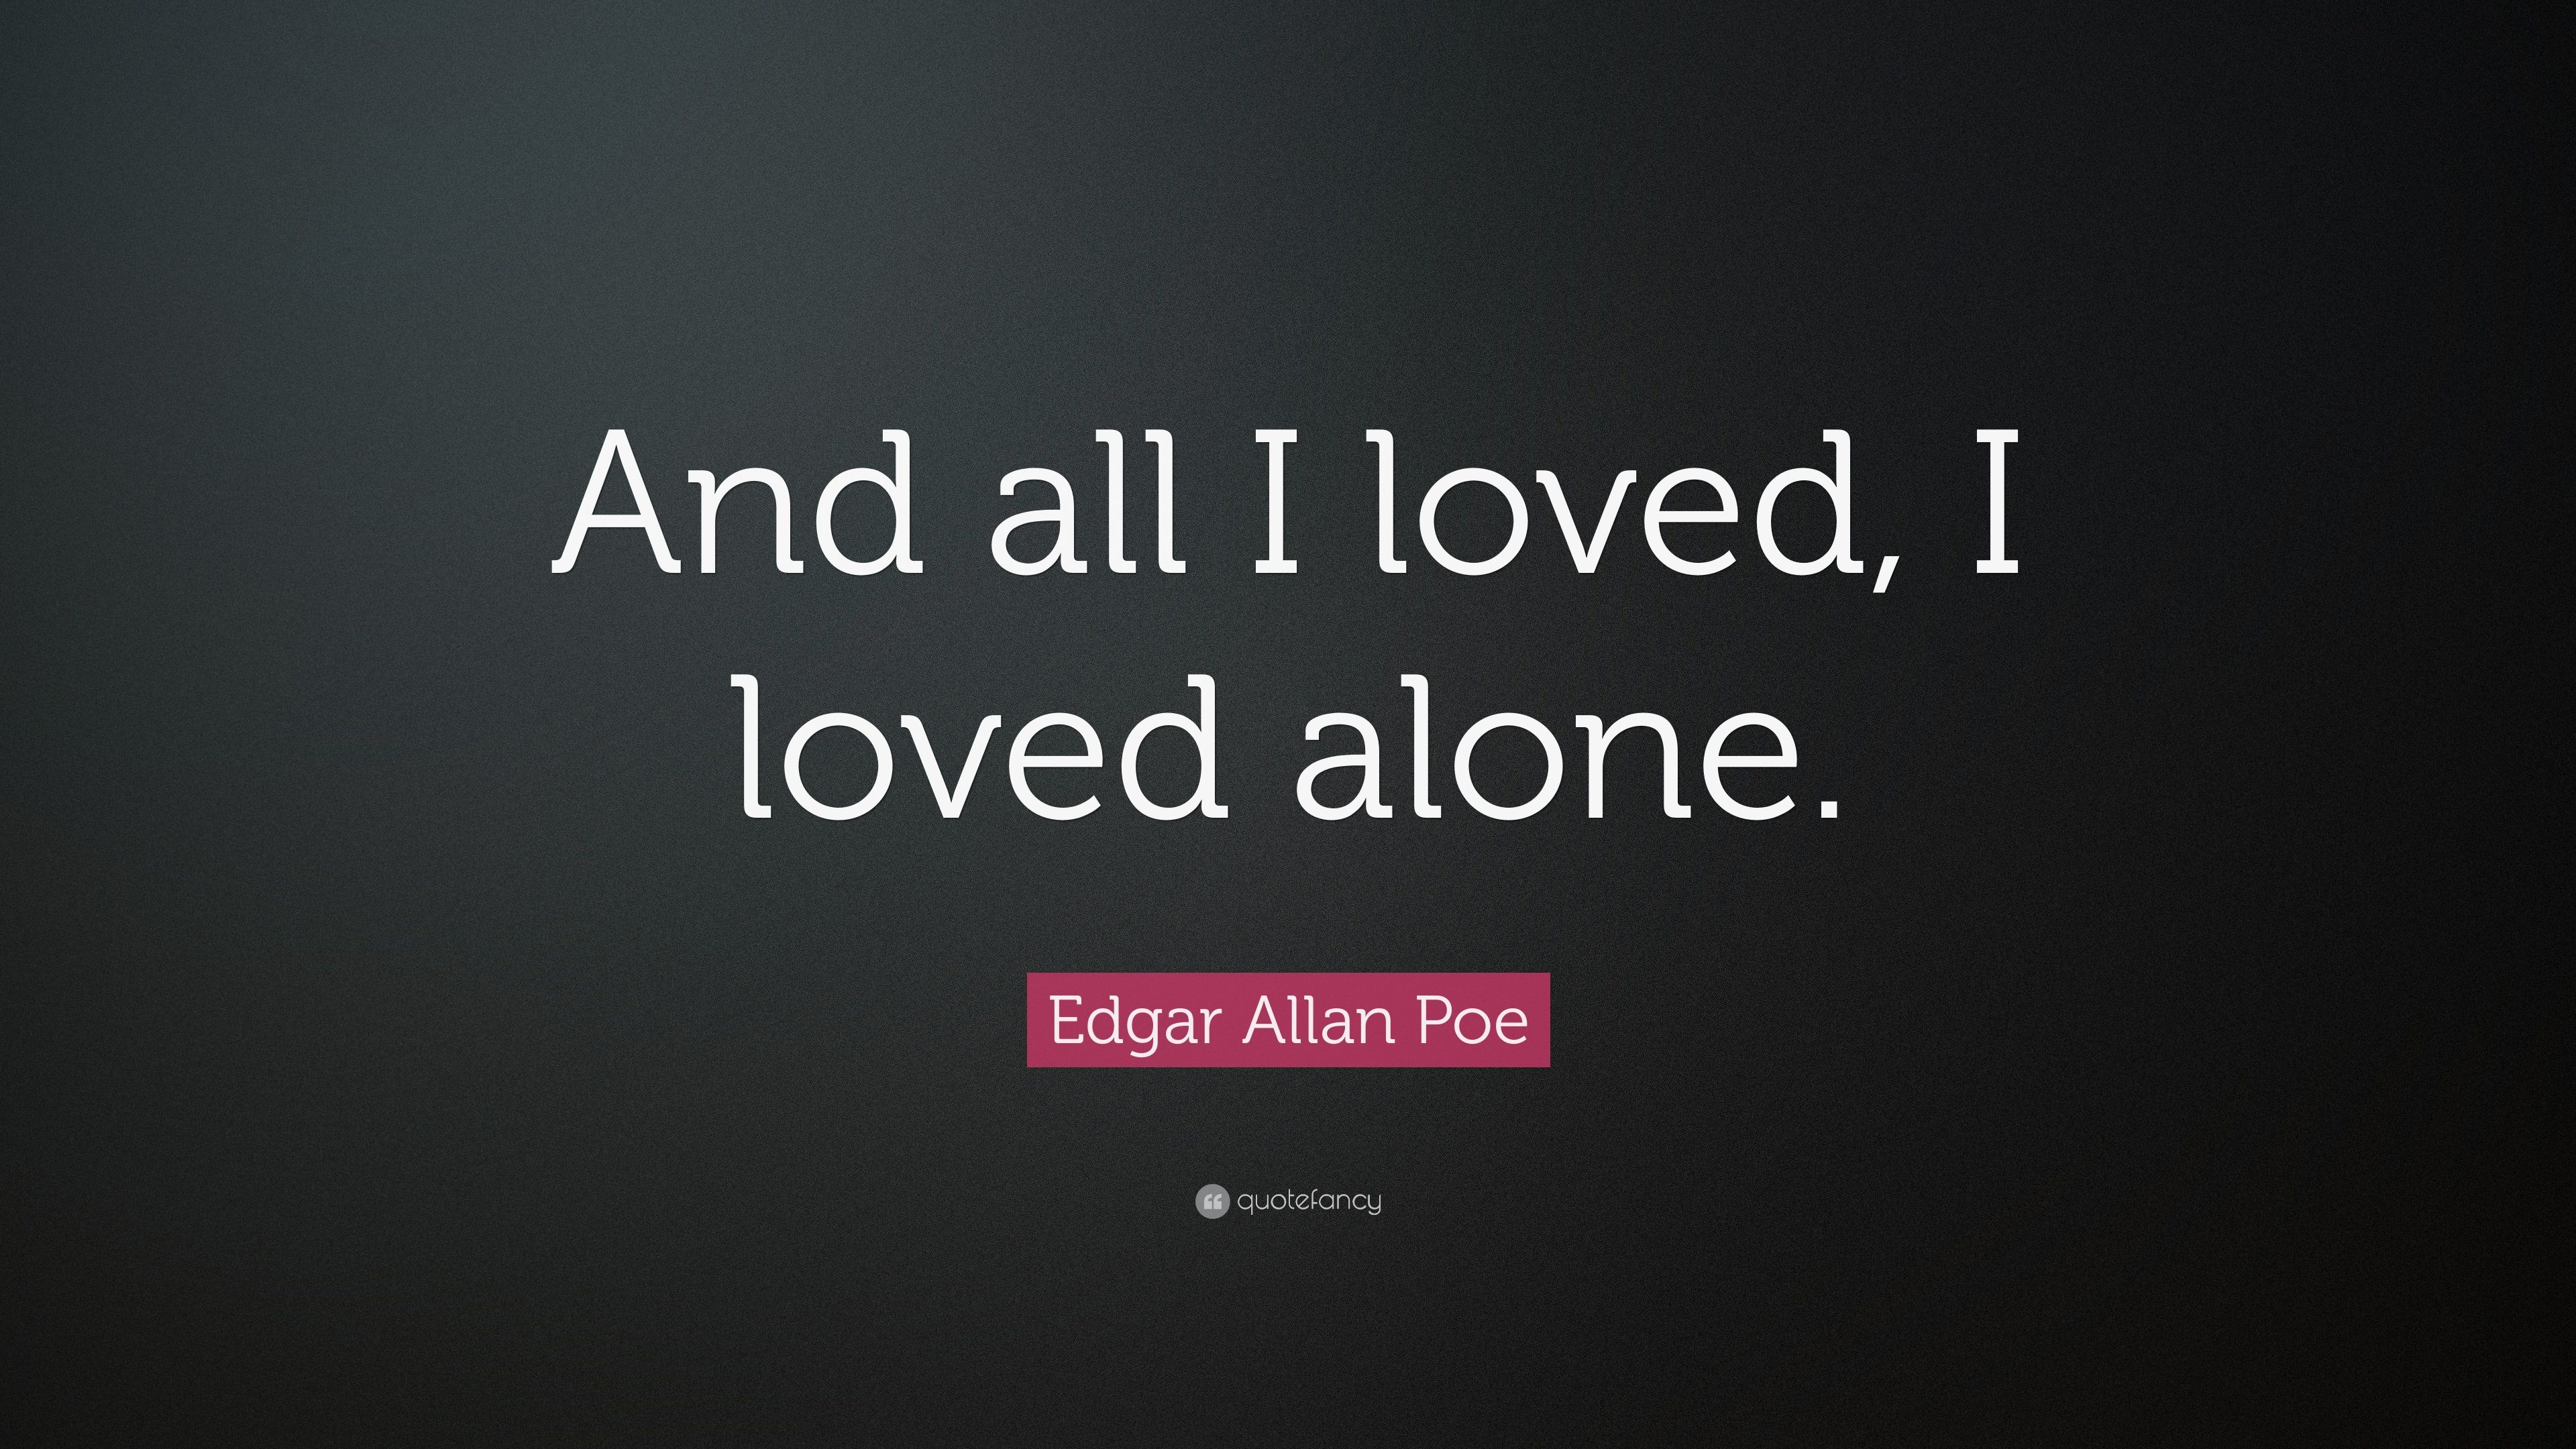 Edgar Allan Poe Quote: “And all I loved, I loved alone.” 20